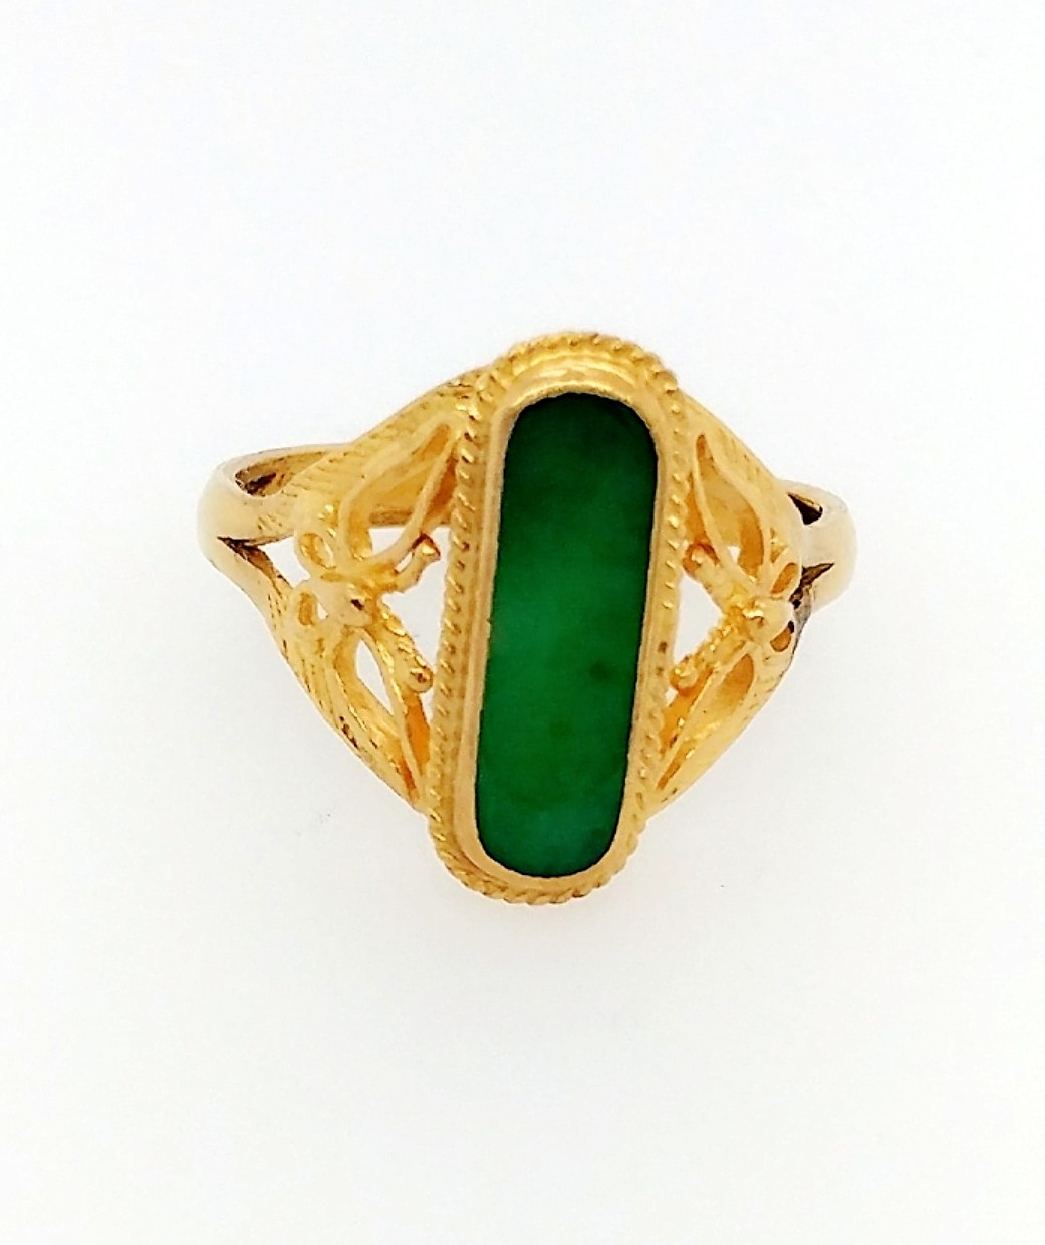 24kt yellow gold handcrafted jade ring 
size is adjustable 
size: 4.25